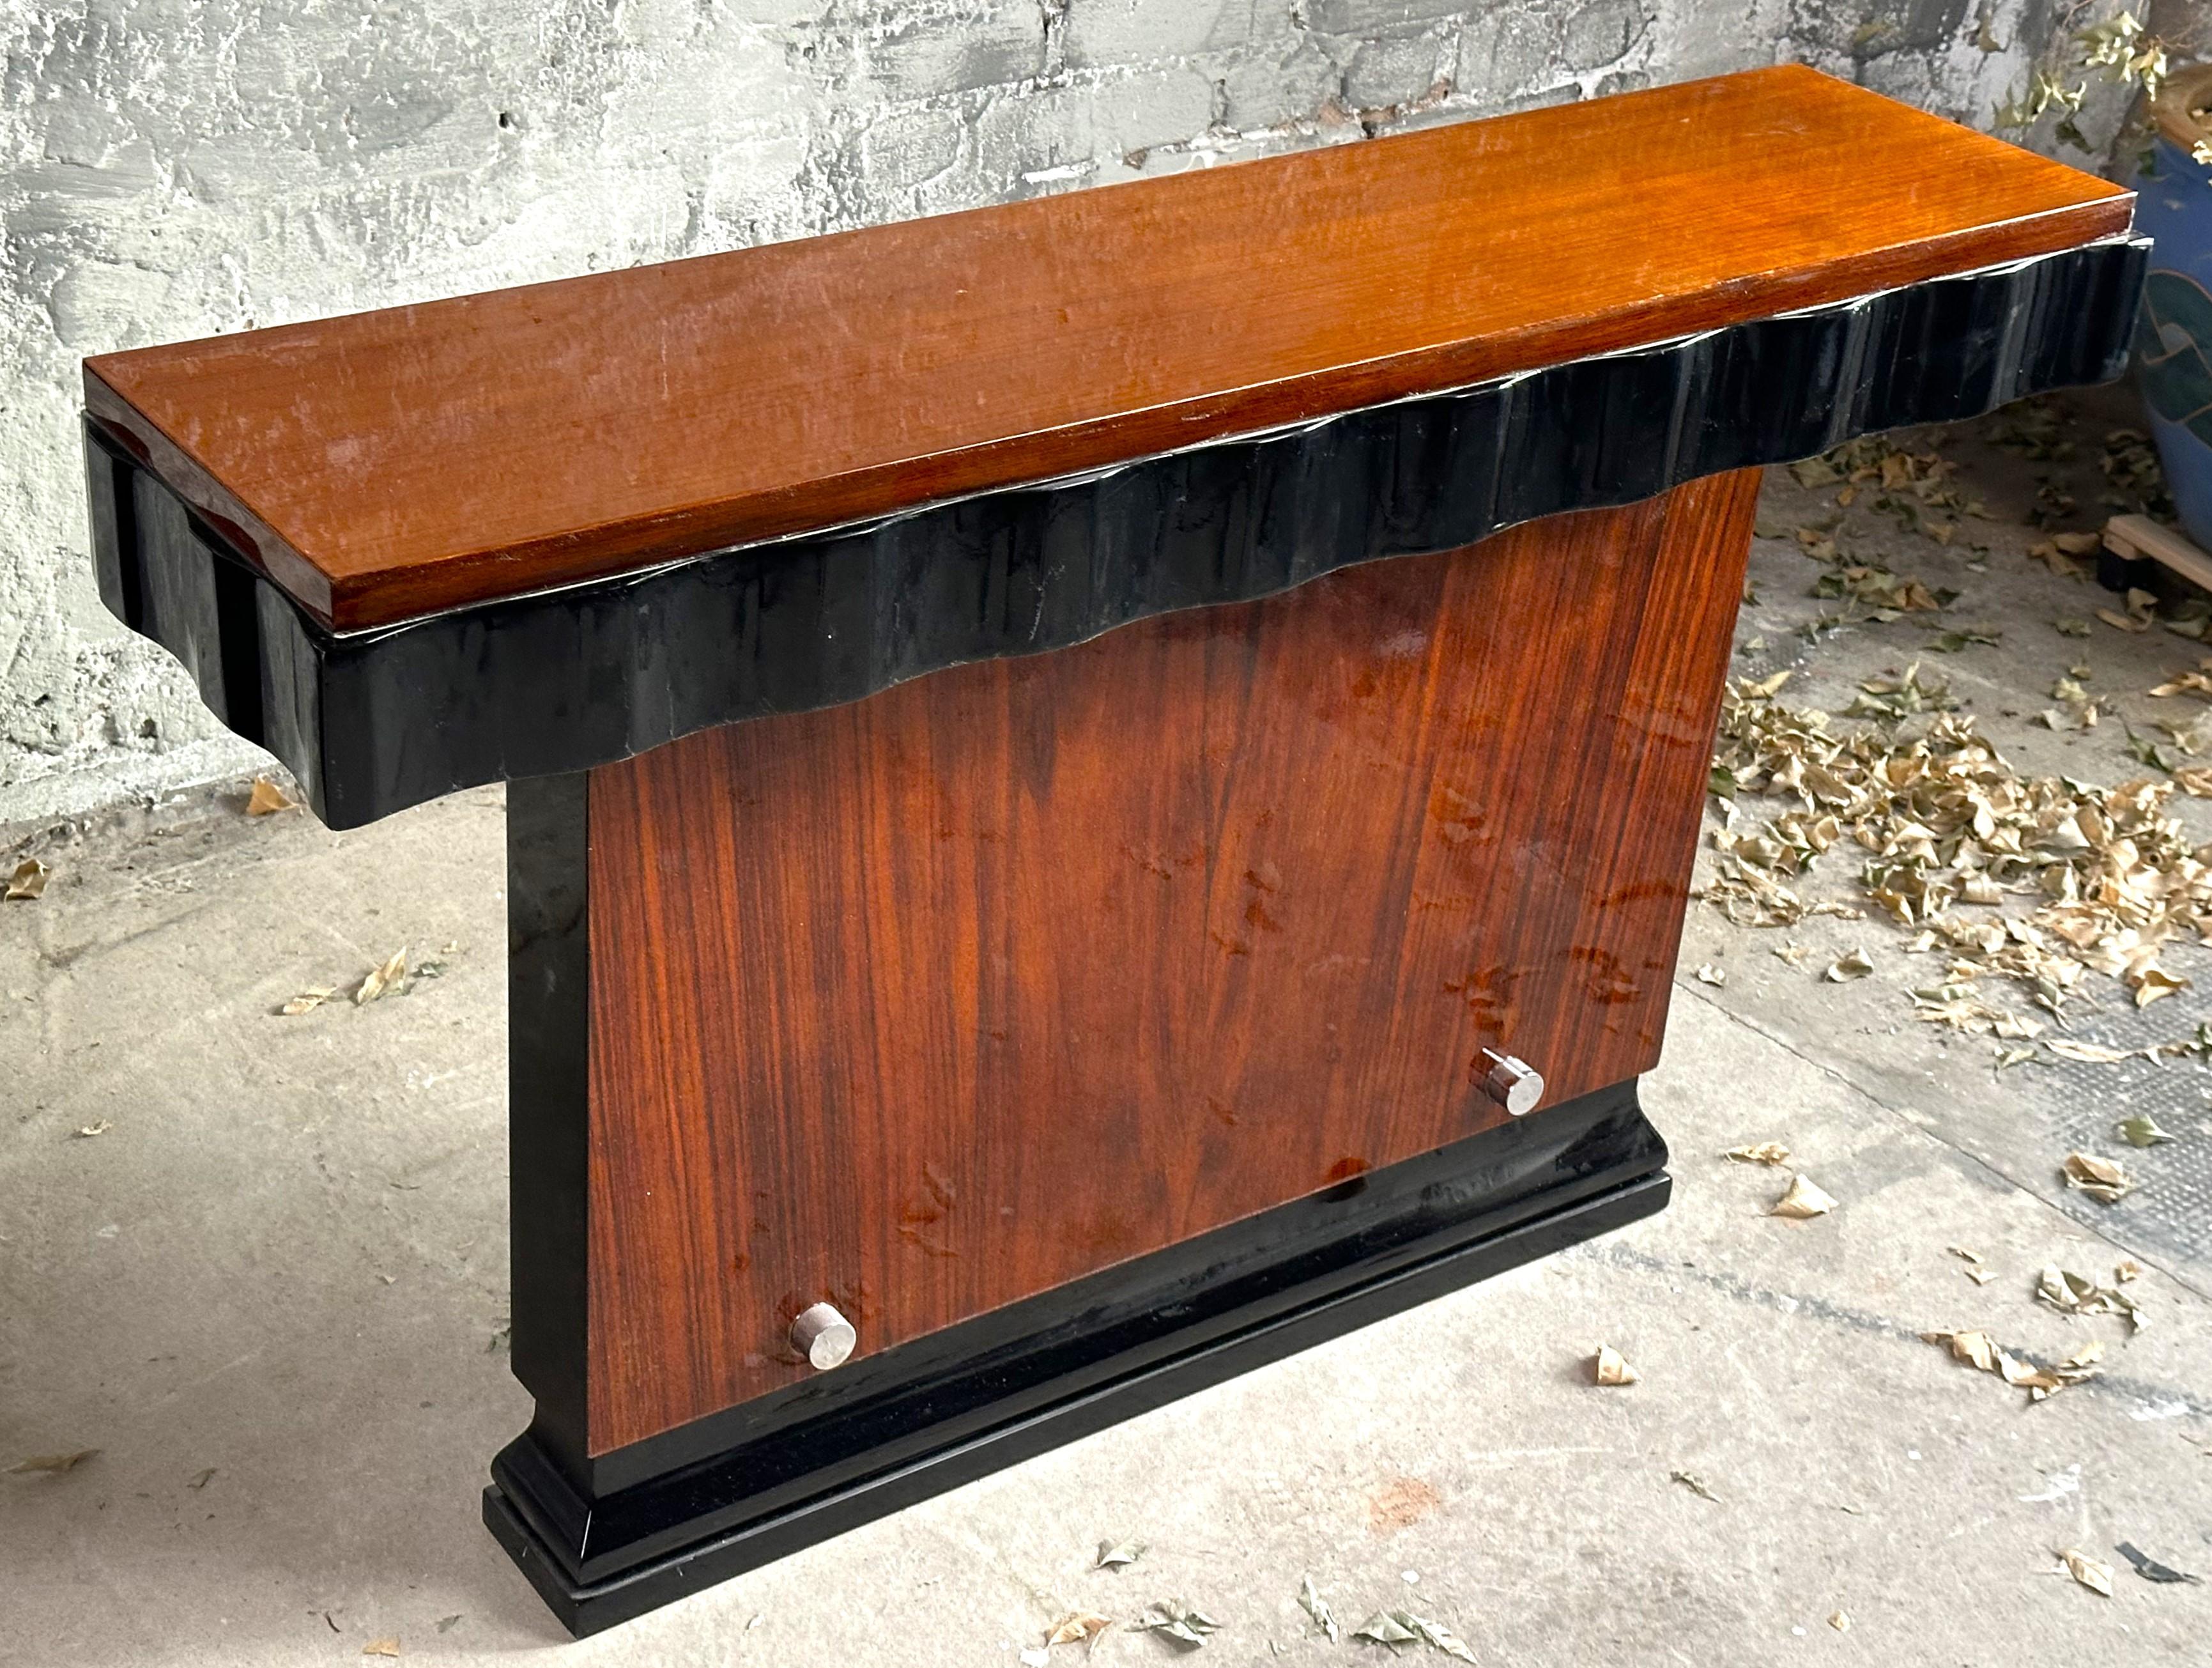 Art Deco Modernist Pair of Console Tables by Kristian Krass, France 1935 For Sale 3